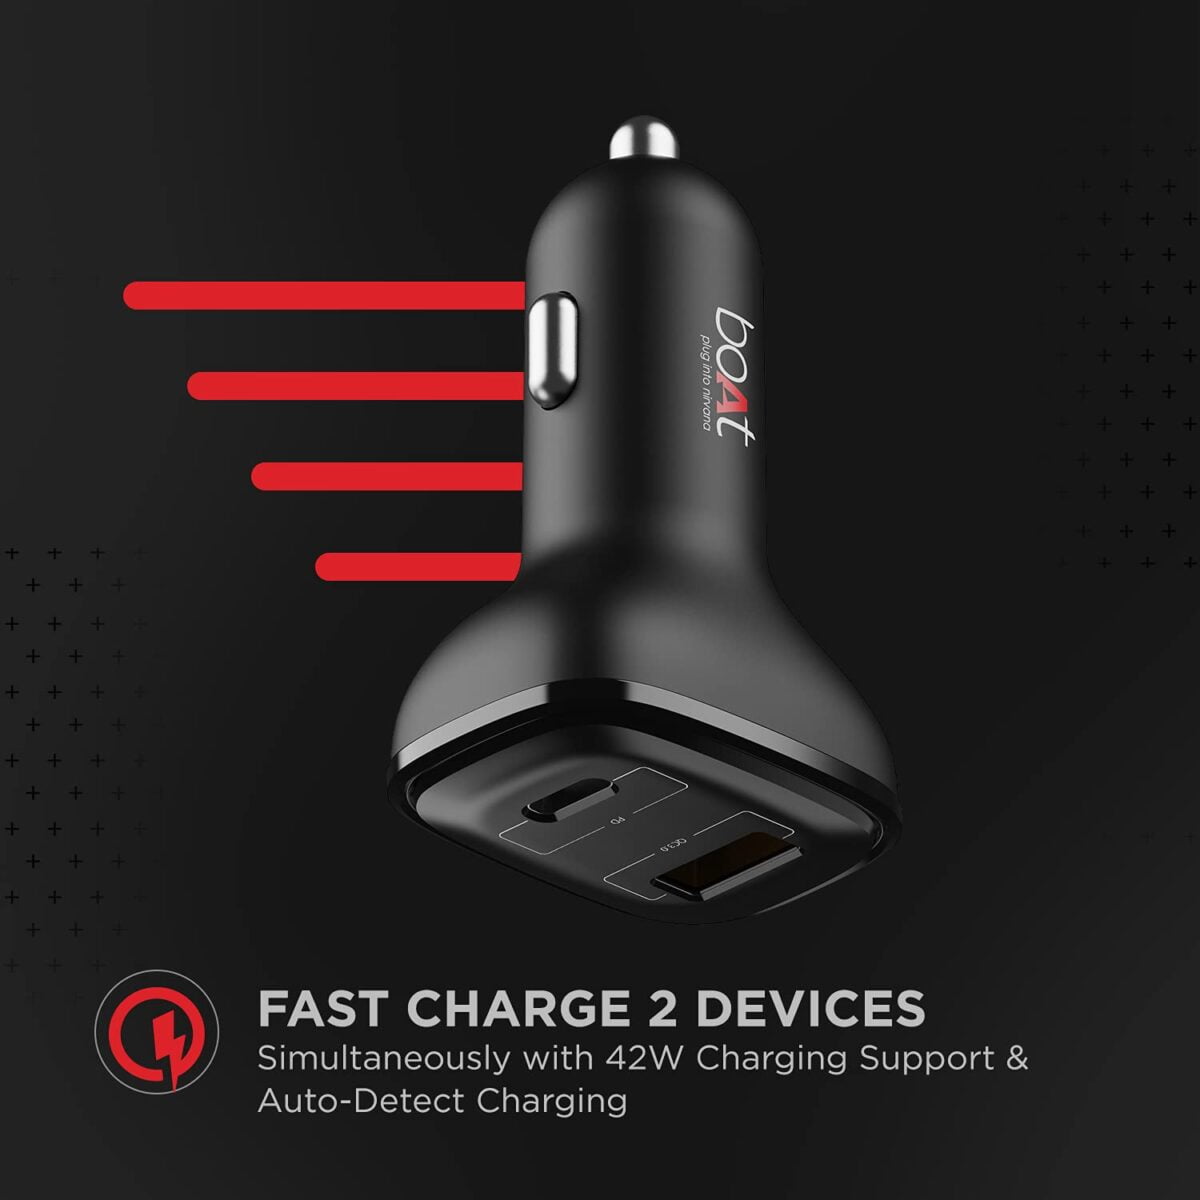 Boat dual port qc pd 24w fast car charger 6 boat dual port qc-pd 24w fast car charger